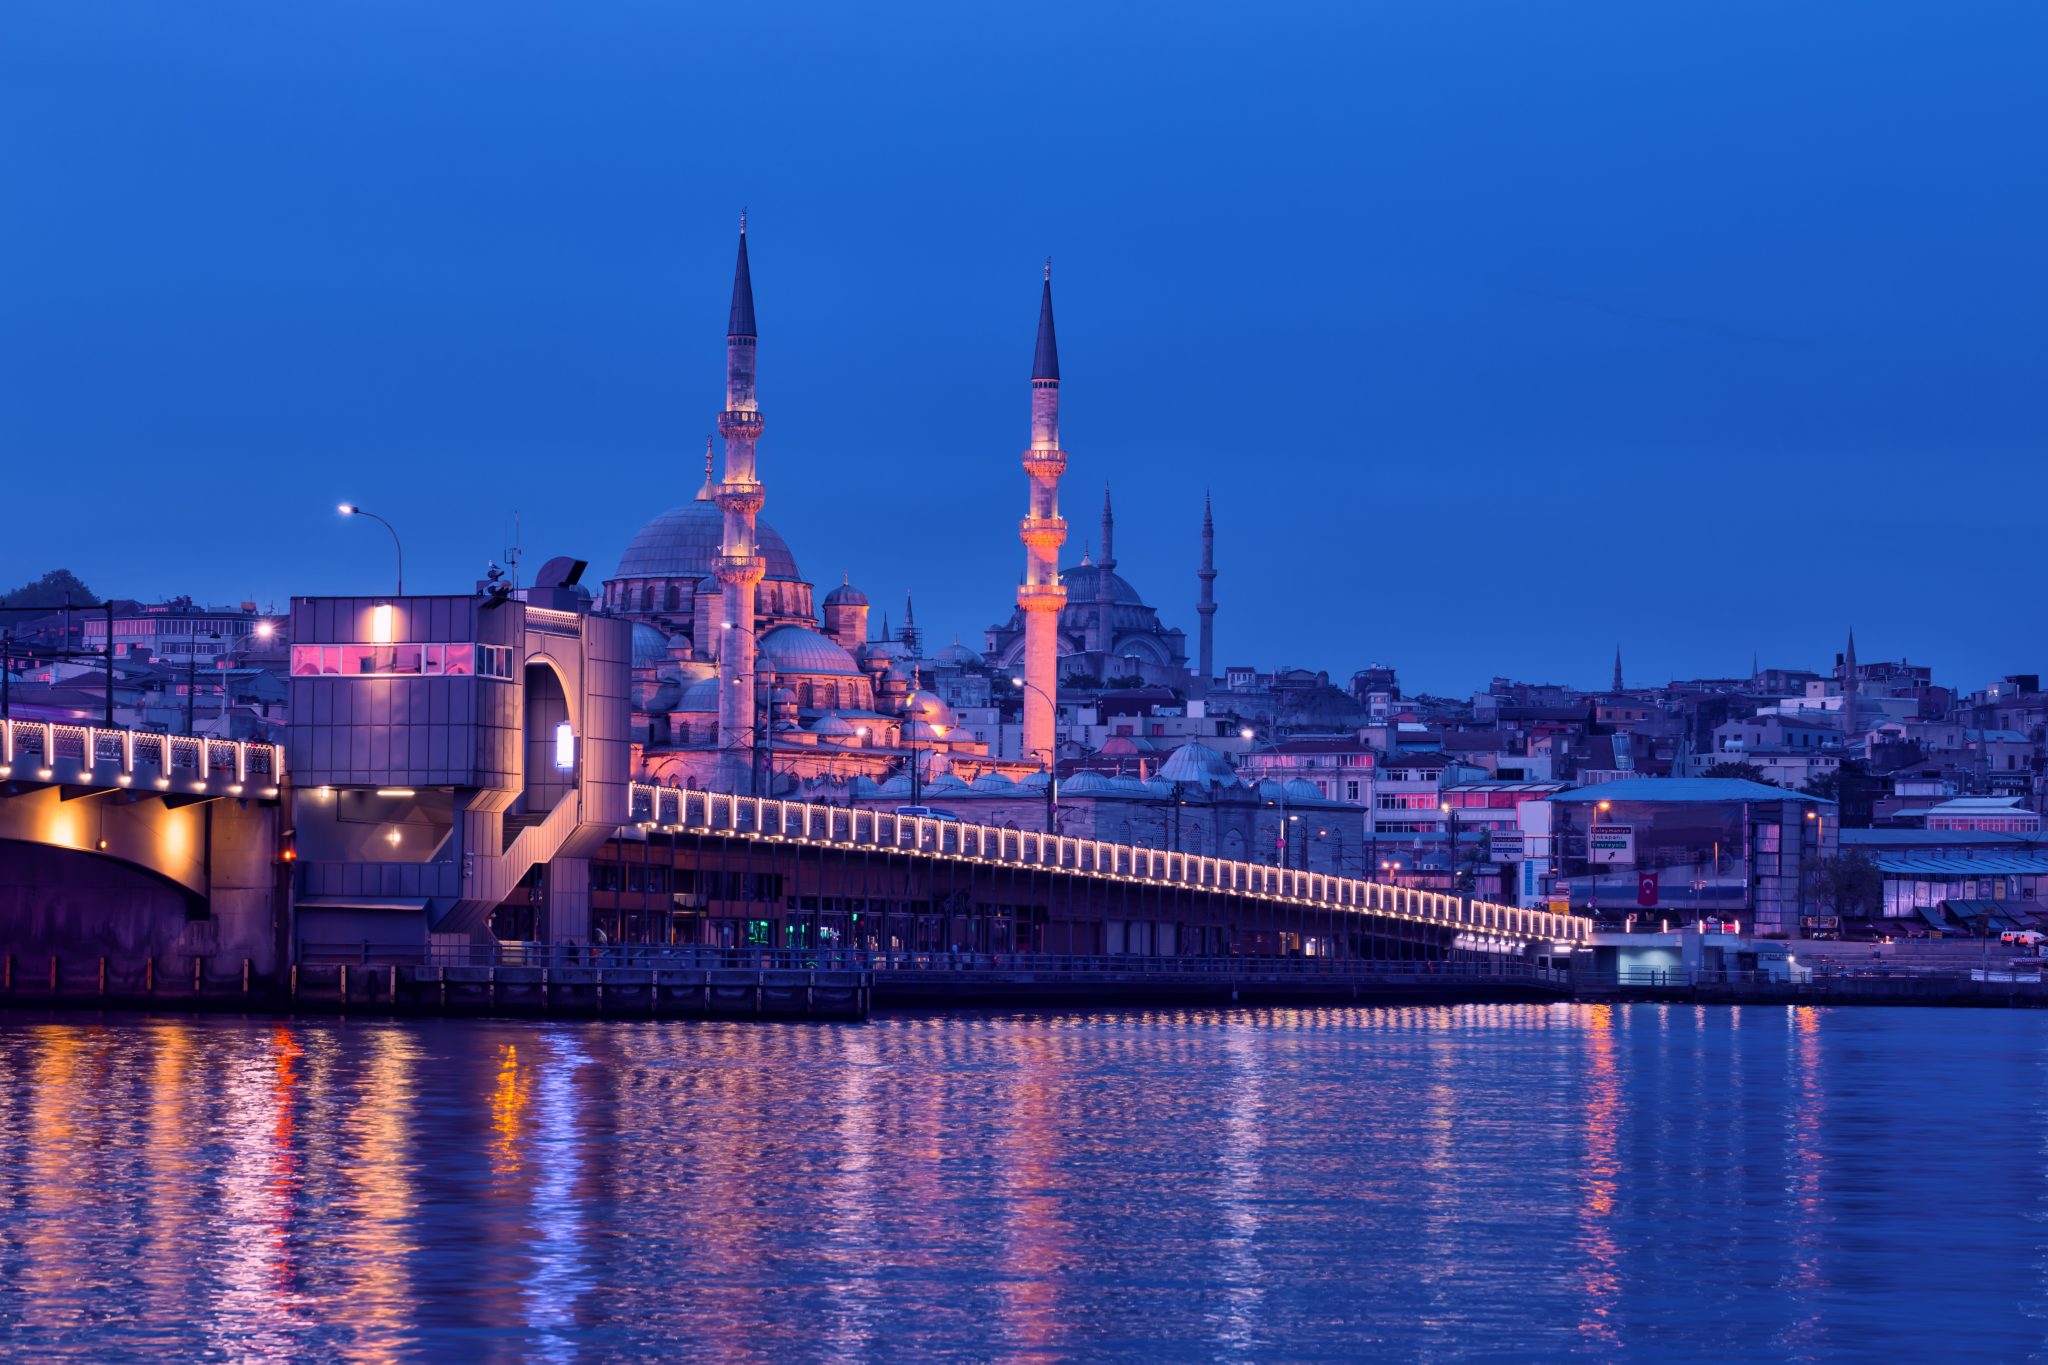 Galata Bridge and Yeni Cami Mosque in Istanbul at night. View from the embankment to the illuminated Galata Bridge and the New Mosque illuminated by electric lights. Istanbul, Turkey